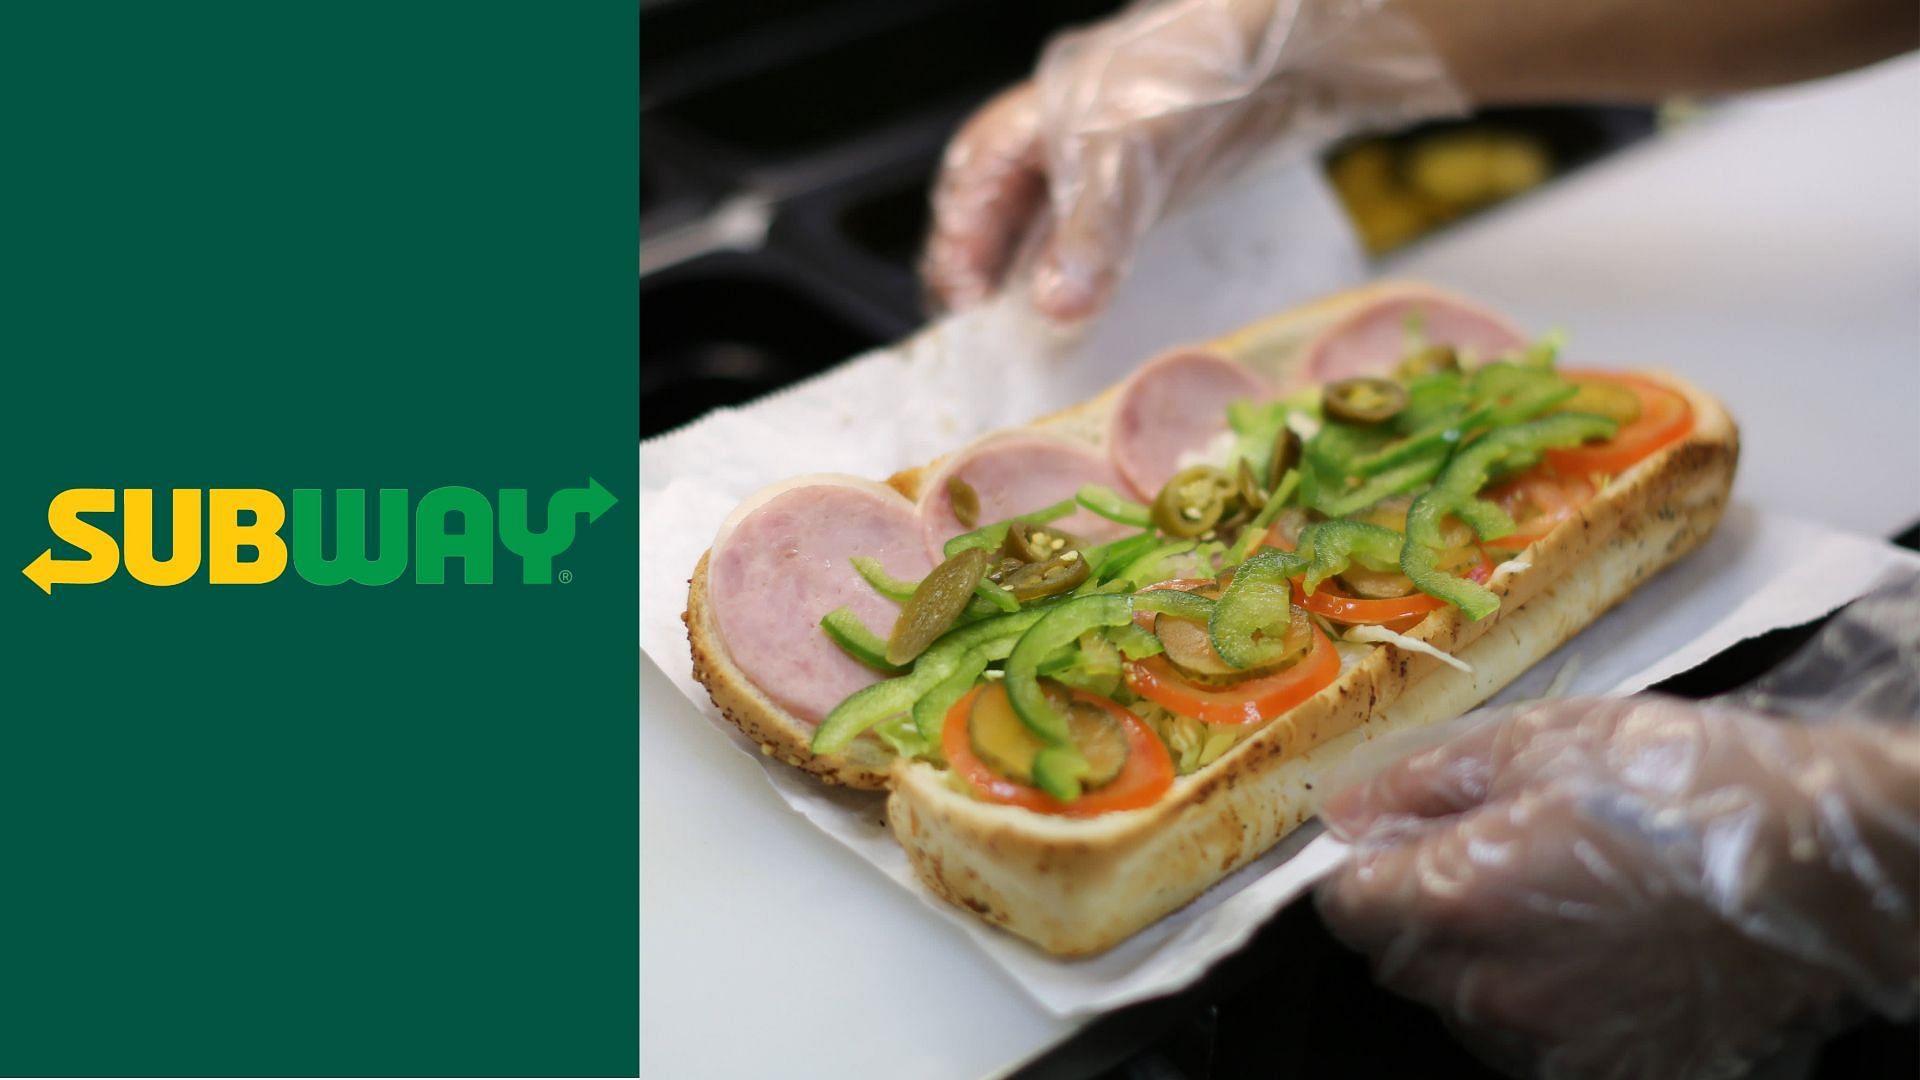 Subway switches to in-store meat slicing starting February (Image via Bloomberg/Getty Images)